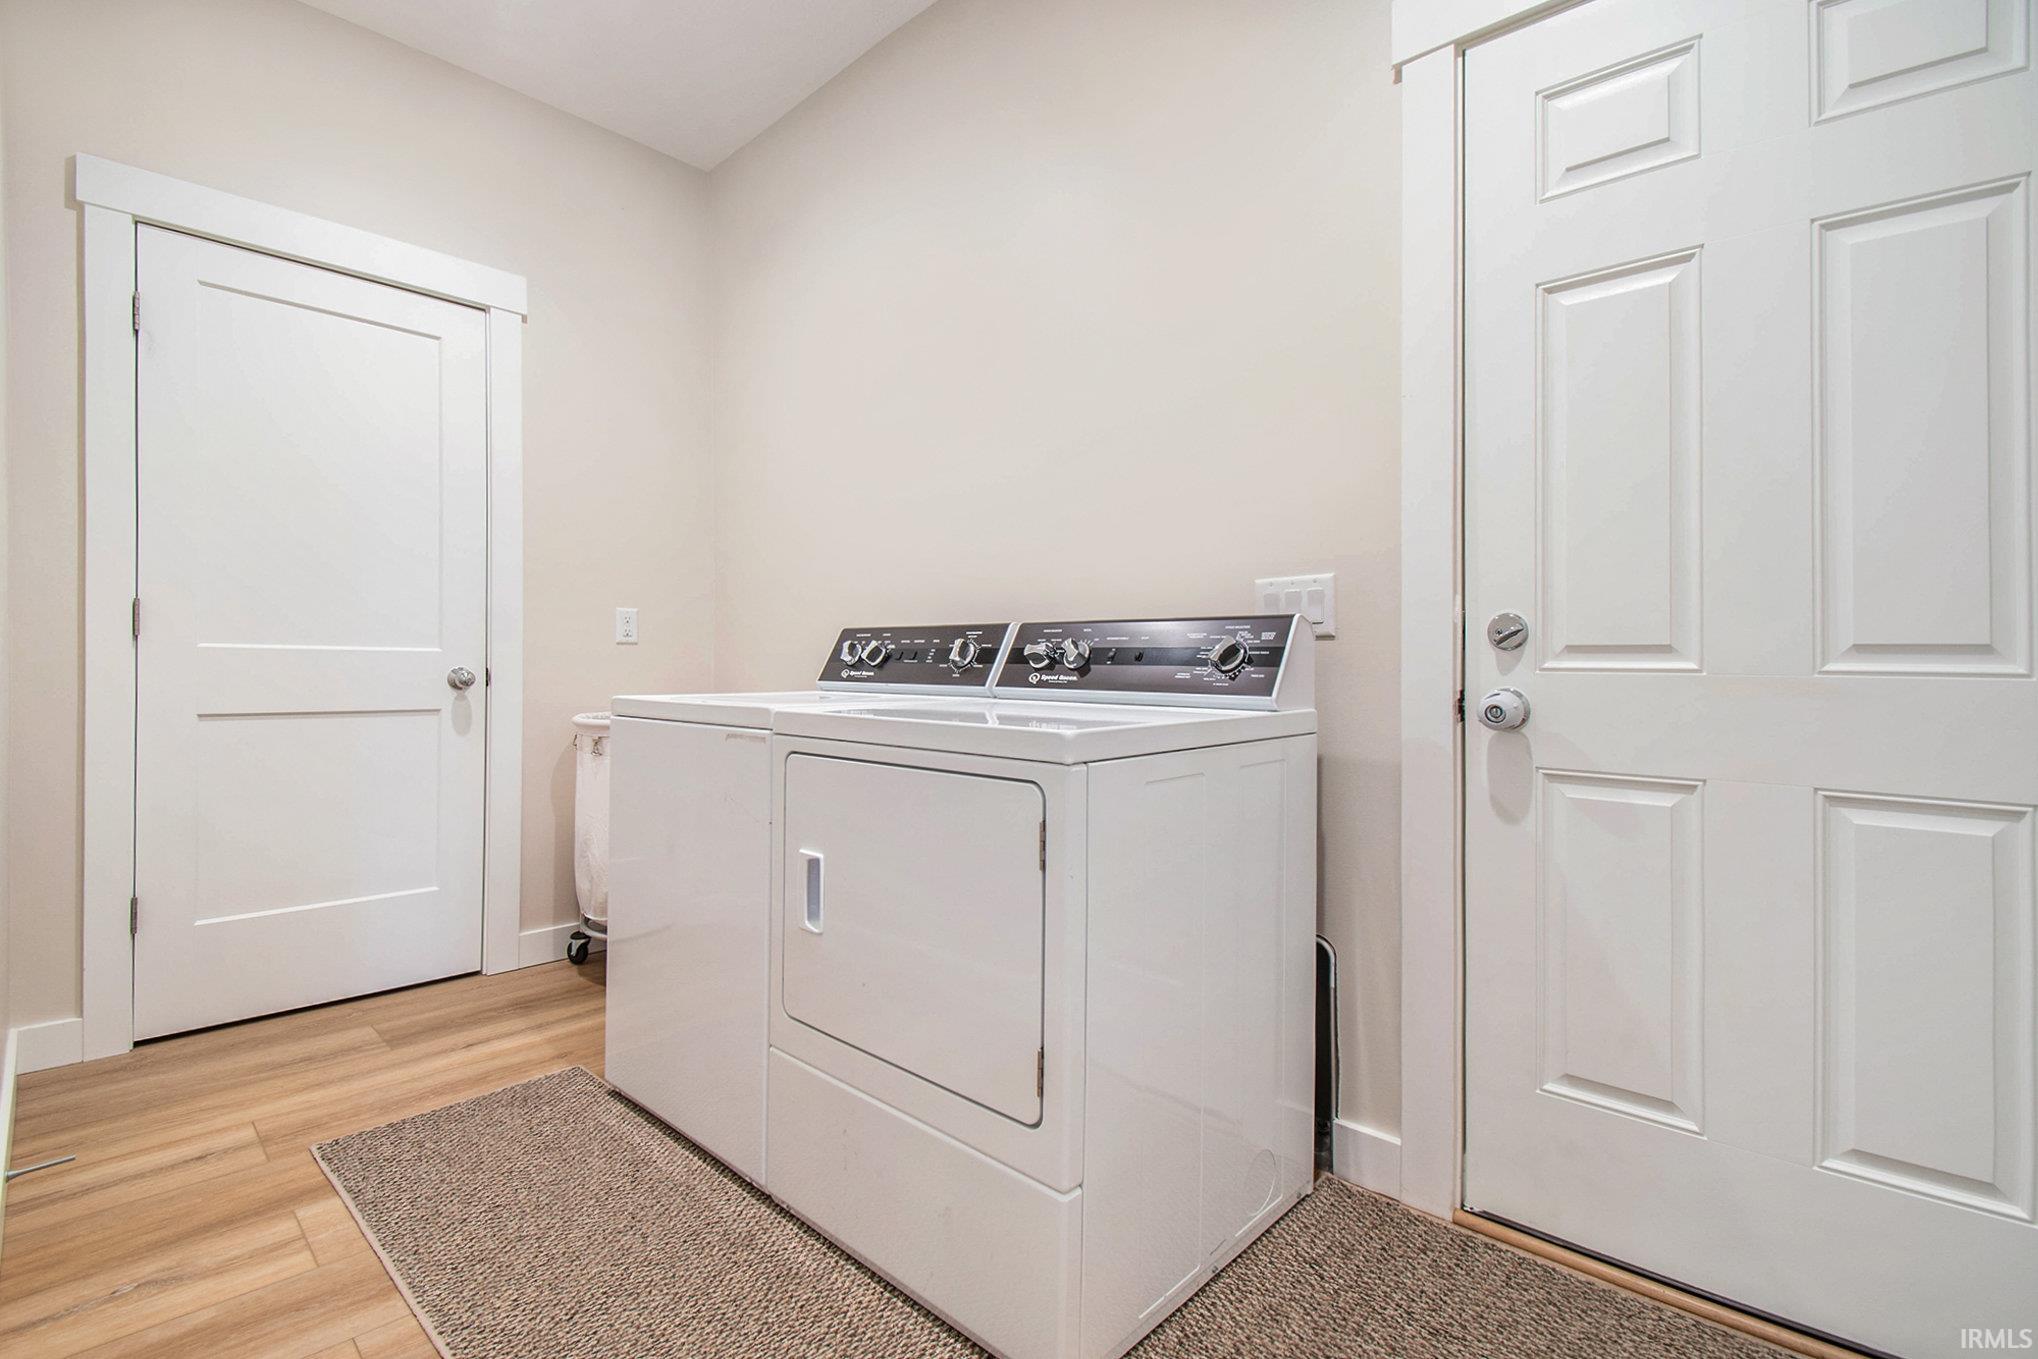 Main Floor Laundry room is in between garage and kitchen. Commericial Speed Queen Washer & Dryer is included.